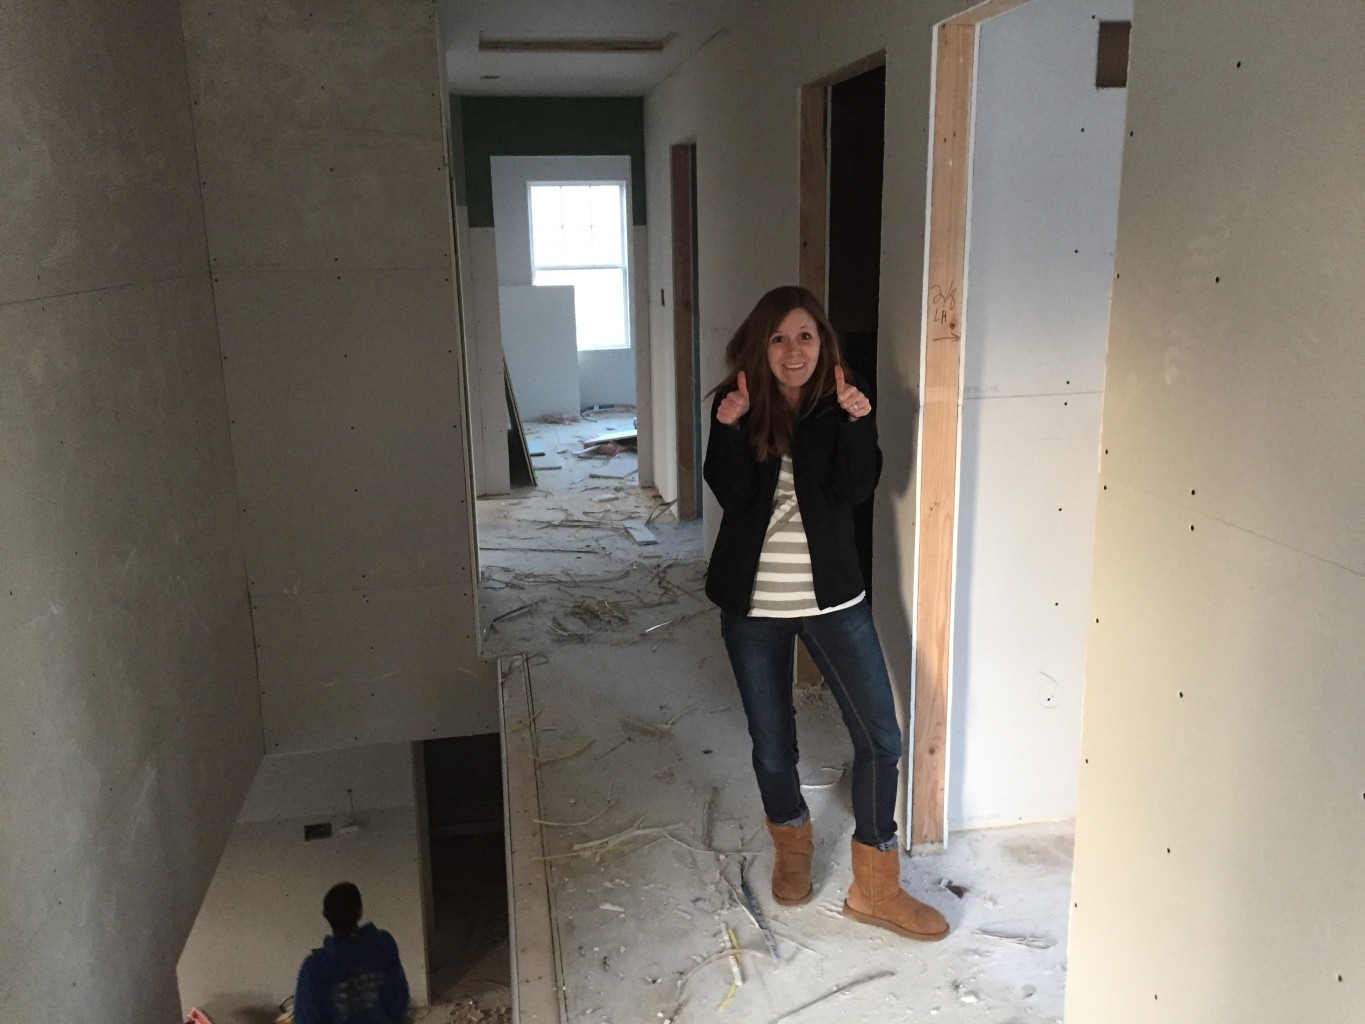 January 30, 2015 (Drywall is up!)